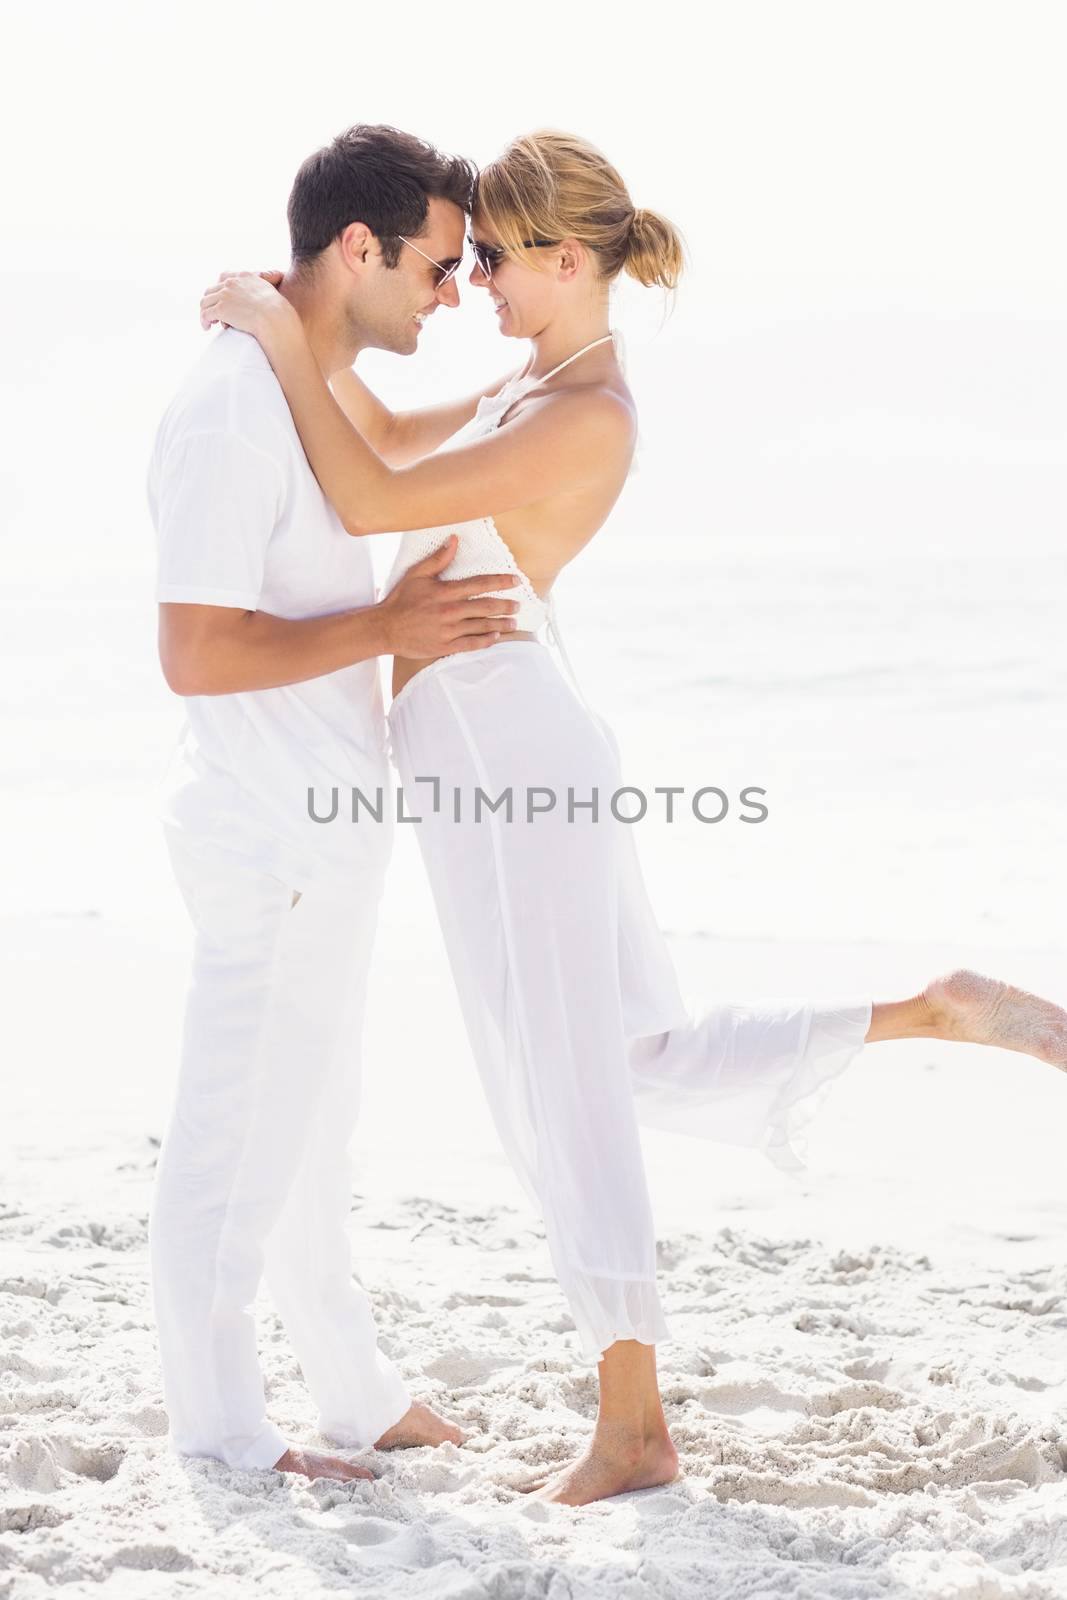 Romantic couple embracing on the beach by Wavebreakmedia